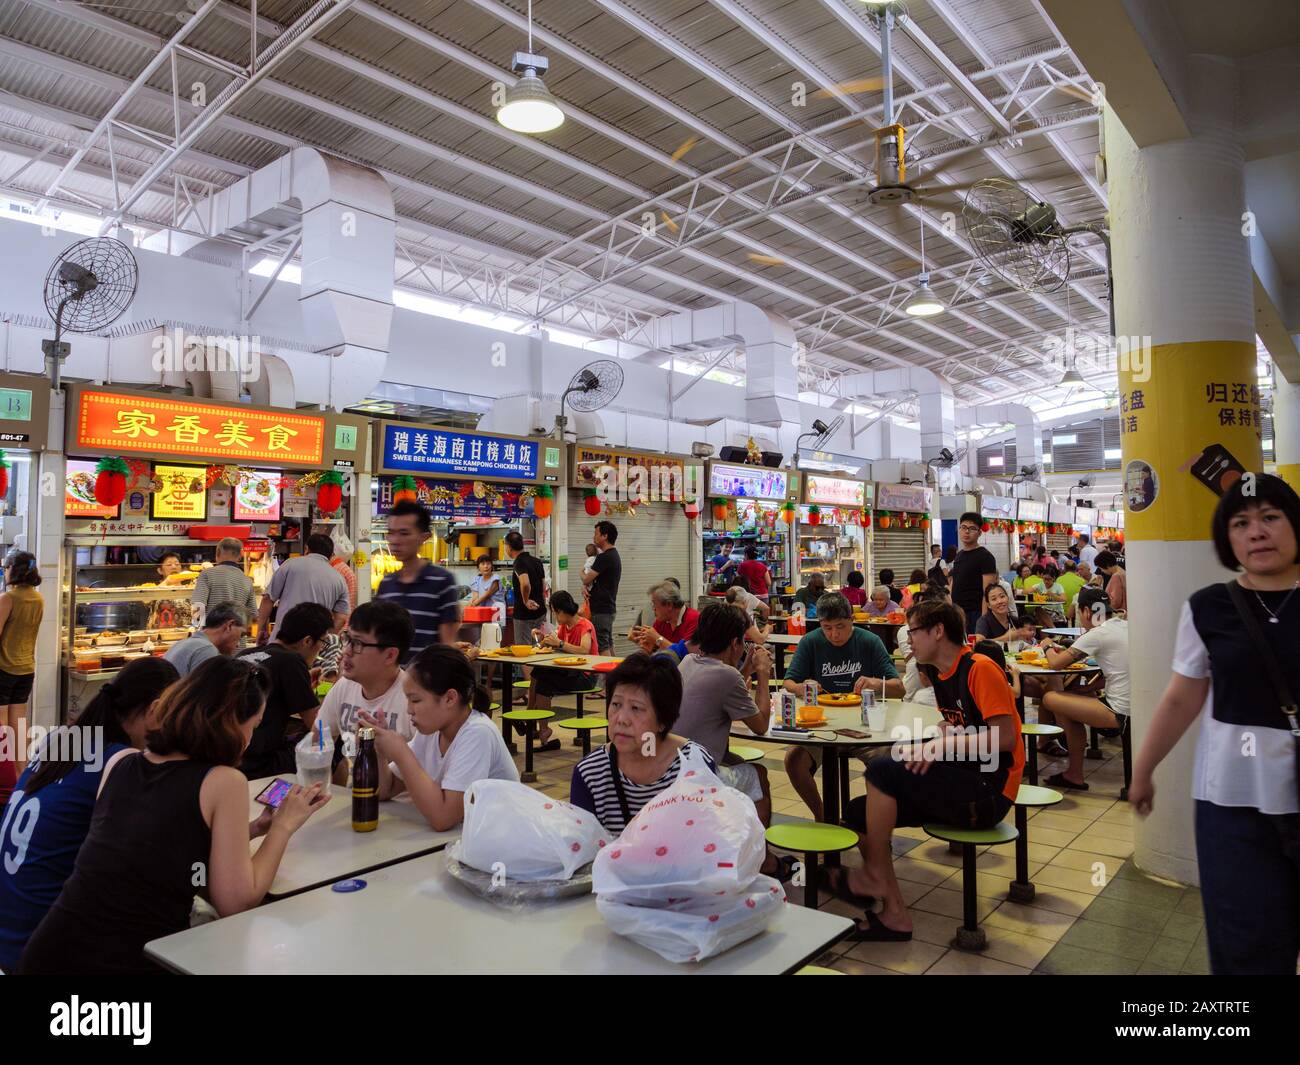 SINGAPORE – 4 JAN 2020 – Asian Chinese diners having a meal and socialising at a crowded self-service hawker centre in Ang Mo Kio, Singapore, Southeas Stock Photo